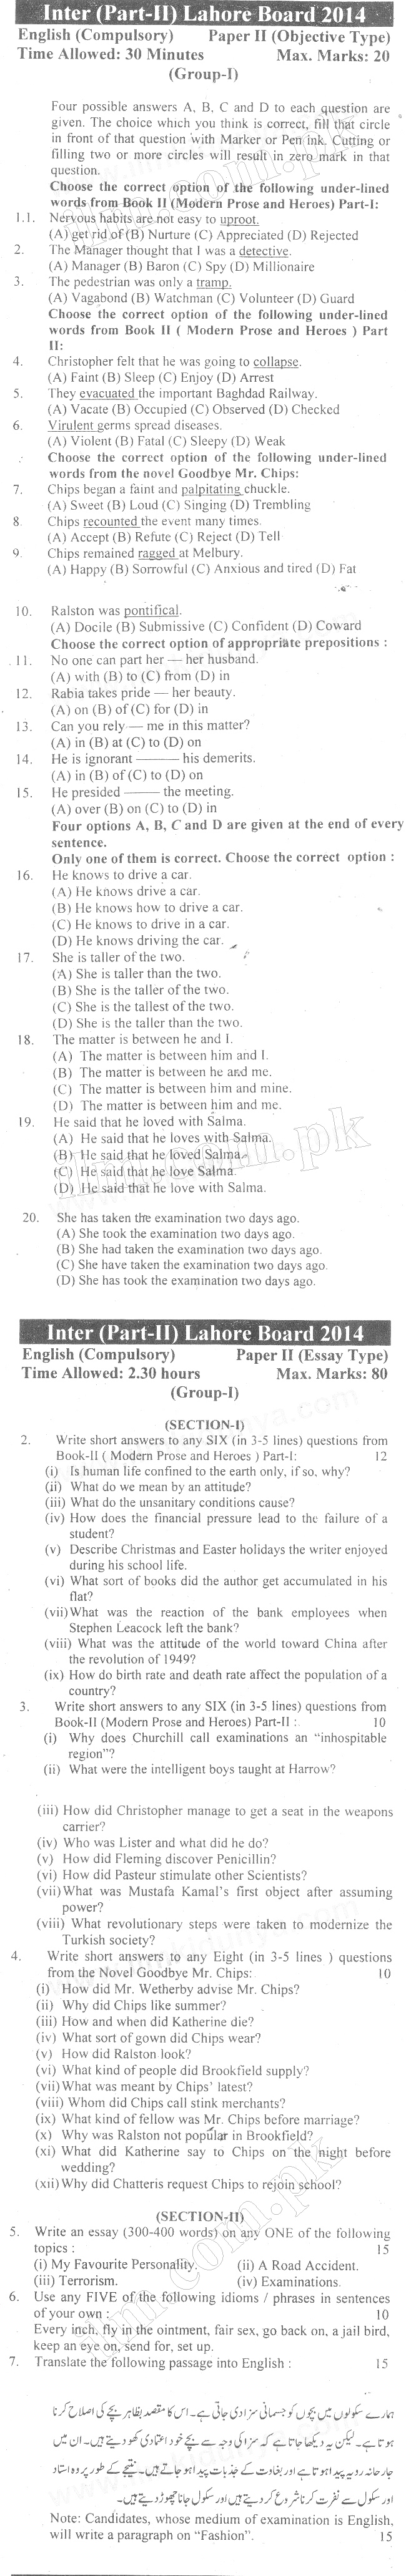 Intermediate 2 Maths Past Papers 2003